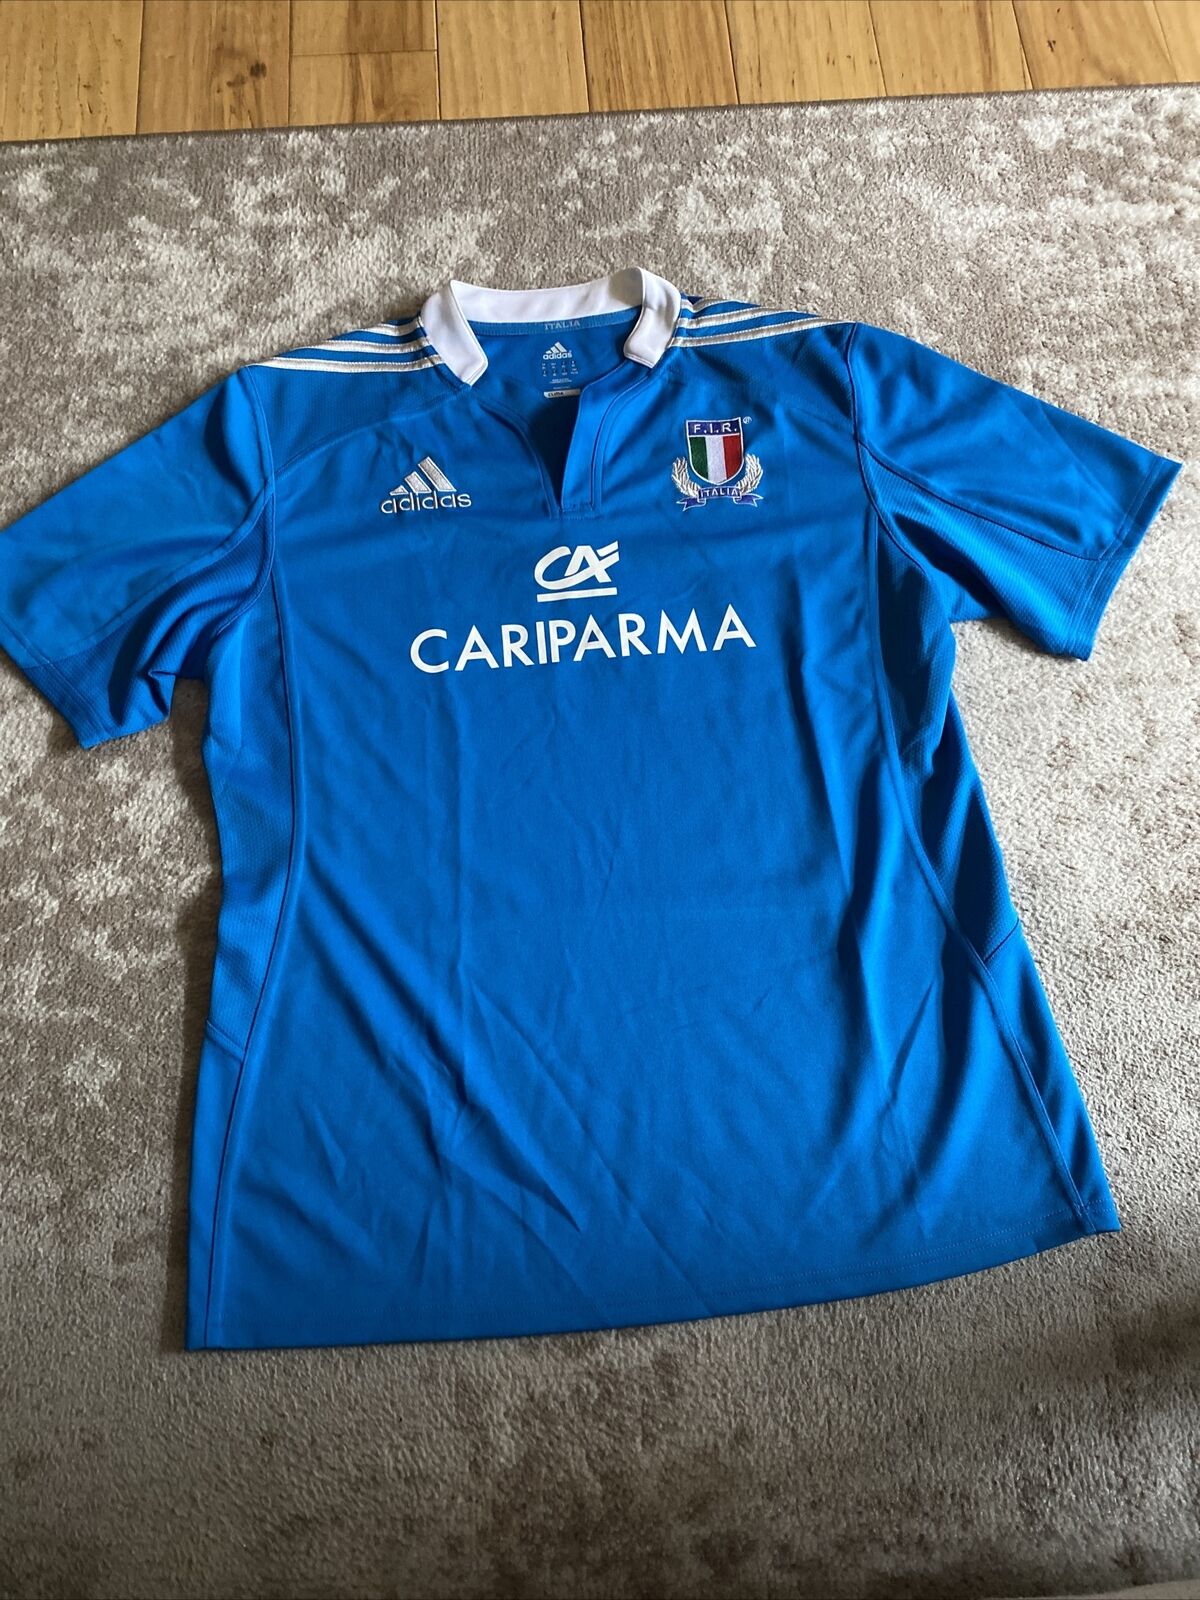 Challenge the lowest price of Japan ☆ ADIDAS FIR 25% OFF Italia 2013 Cariparma Rugby Italy Clima Jersey Union